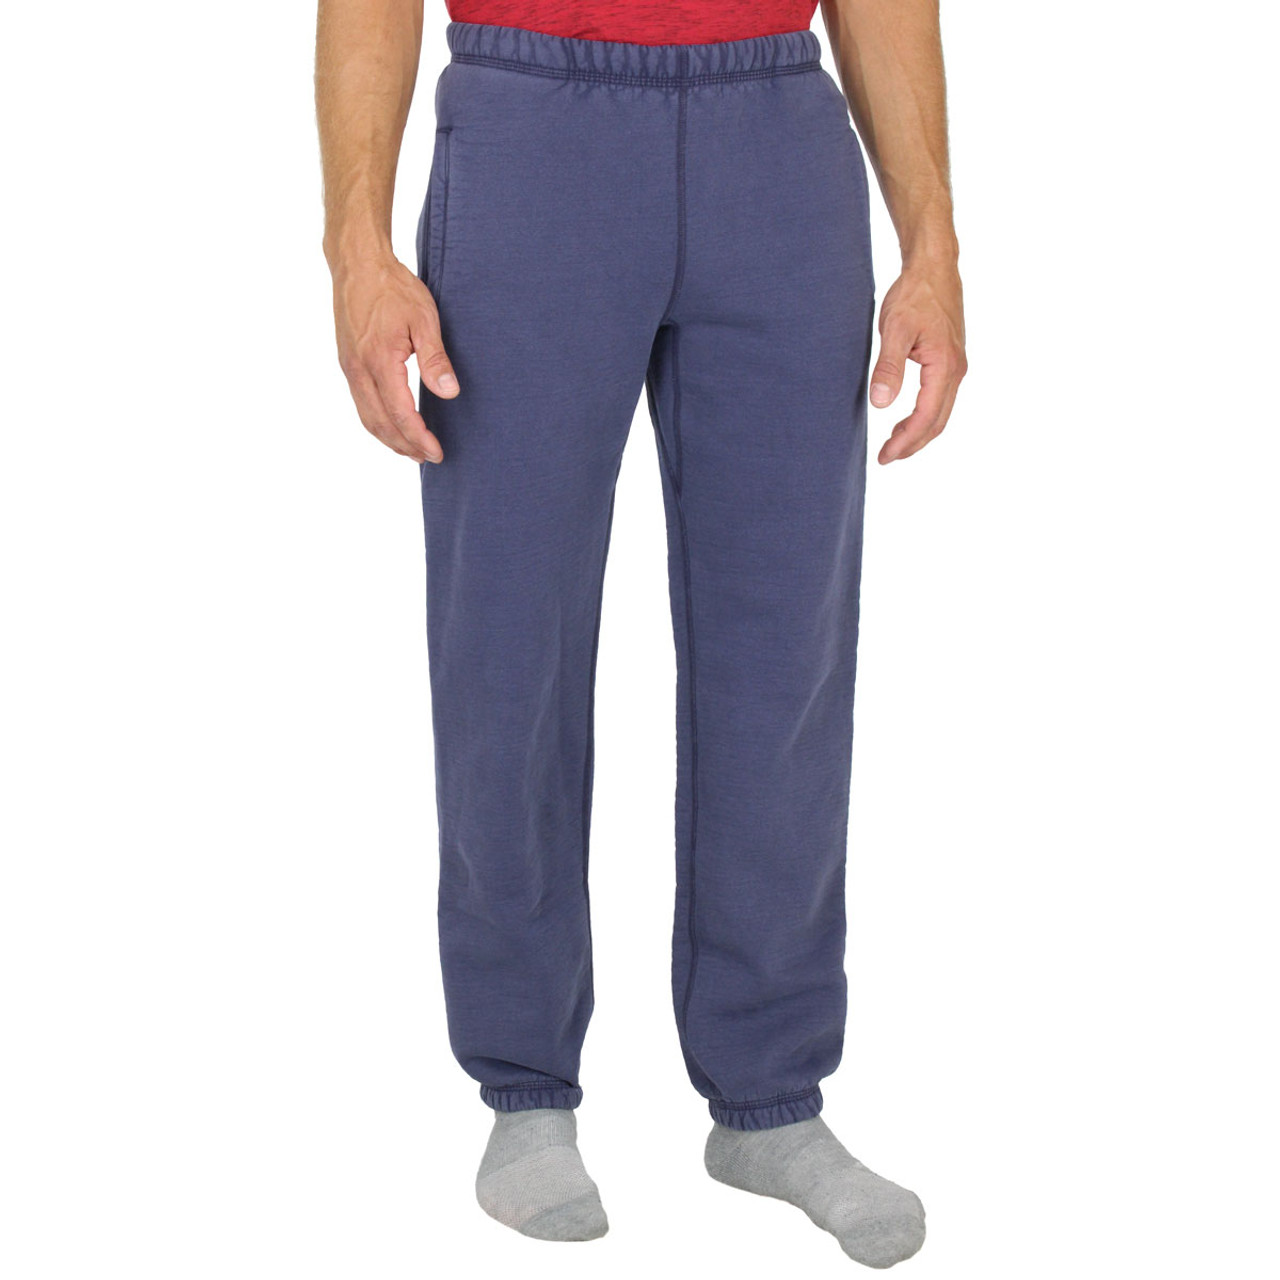 THICK 100% All-Cotton CUFFED SWEATPANTS for MEN by CottonMill